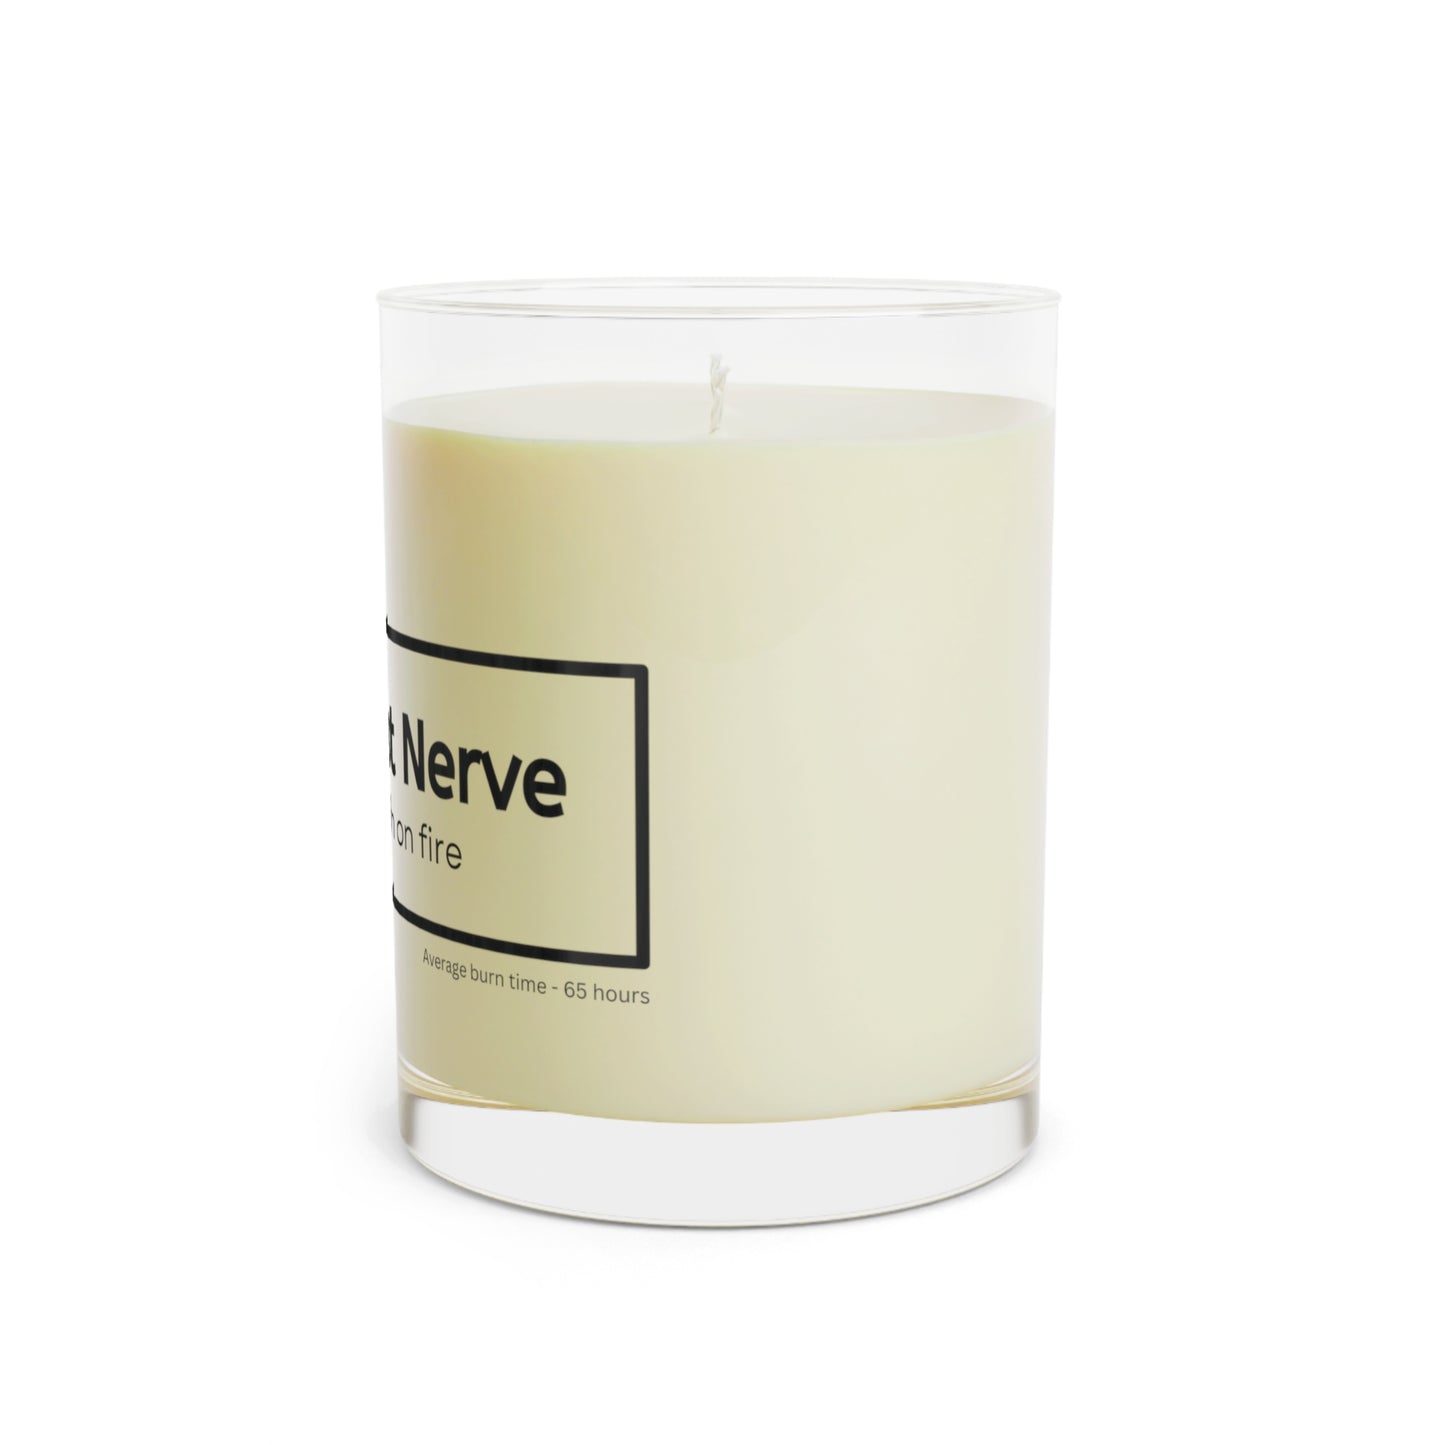 Mom's Last Nerve - Scented Candle - Full Glass, 11oz